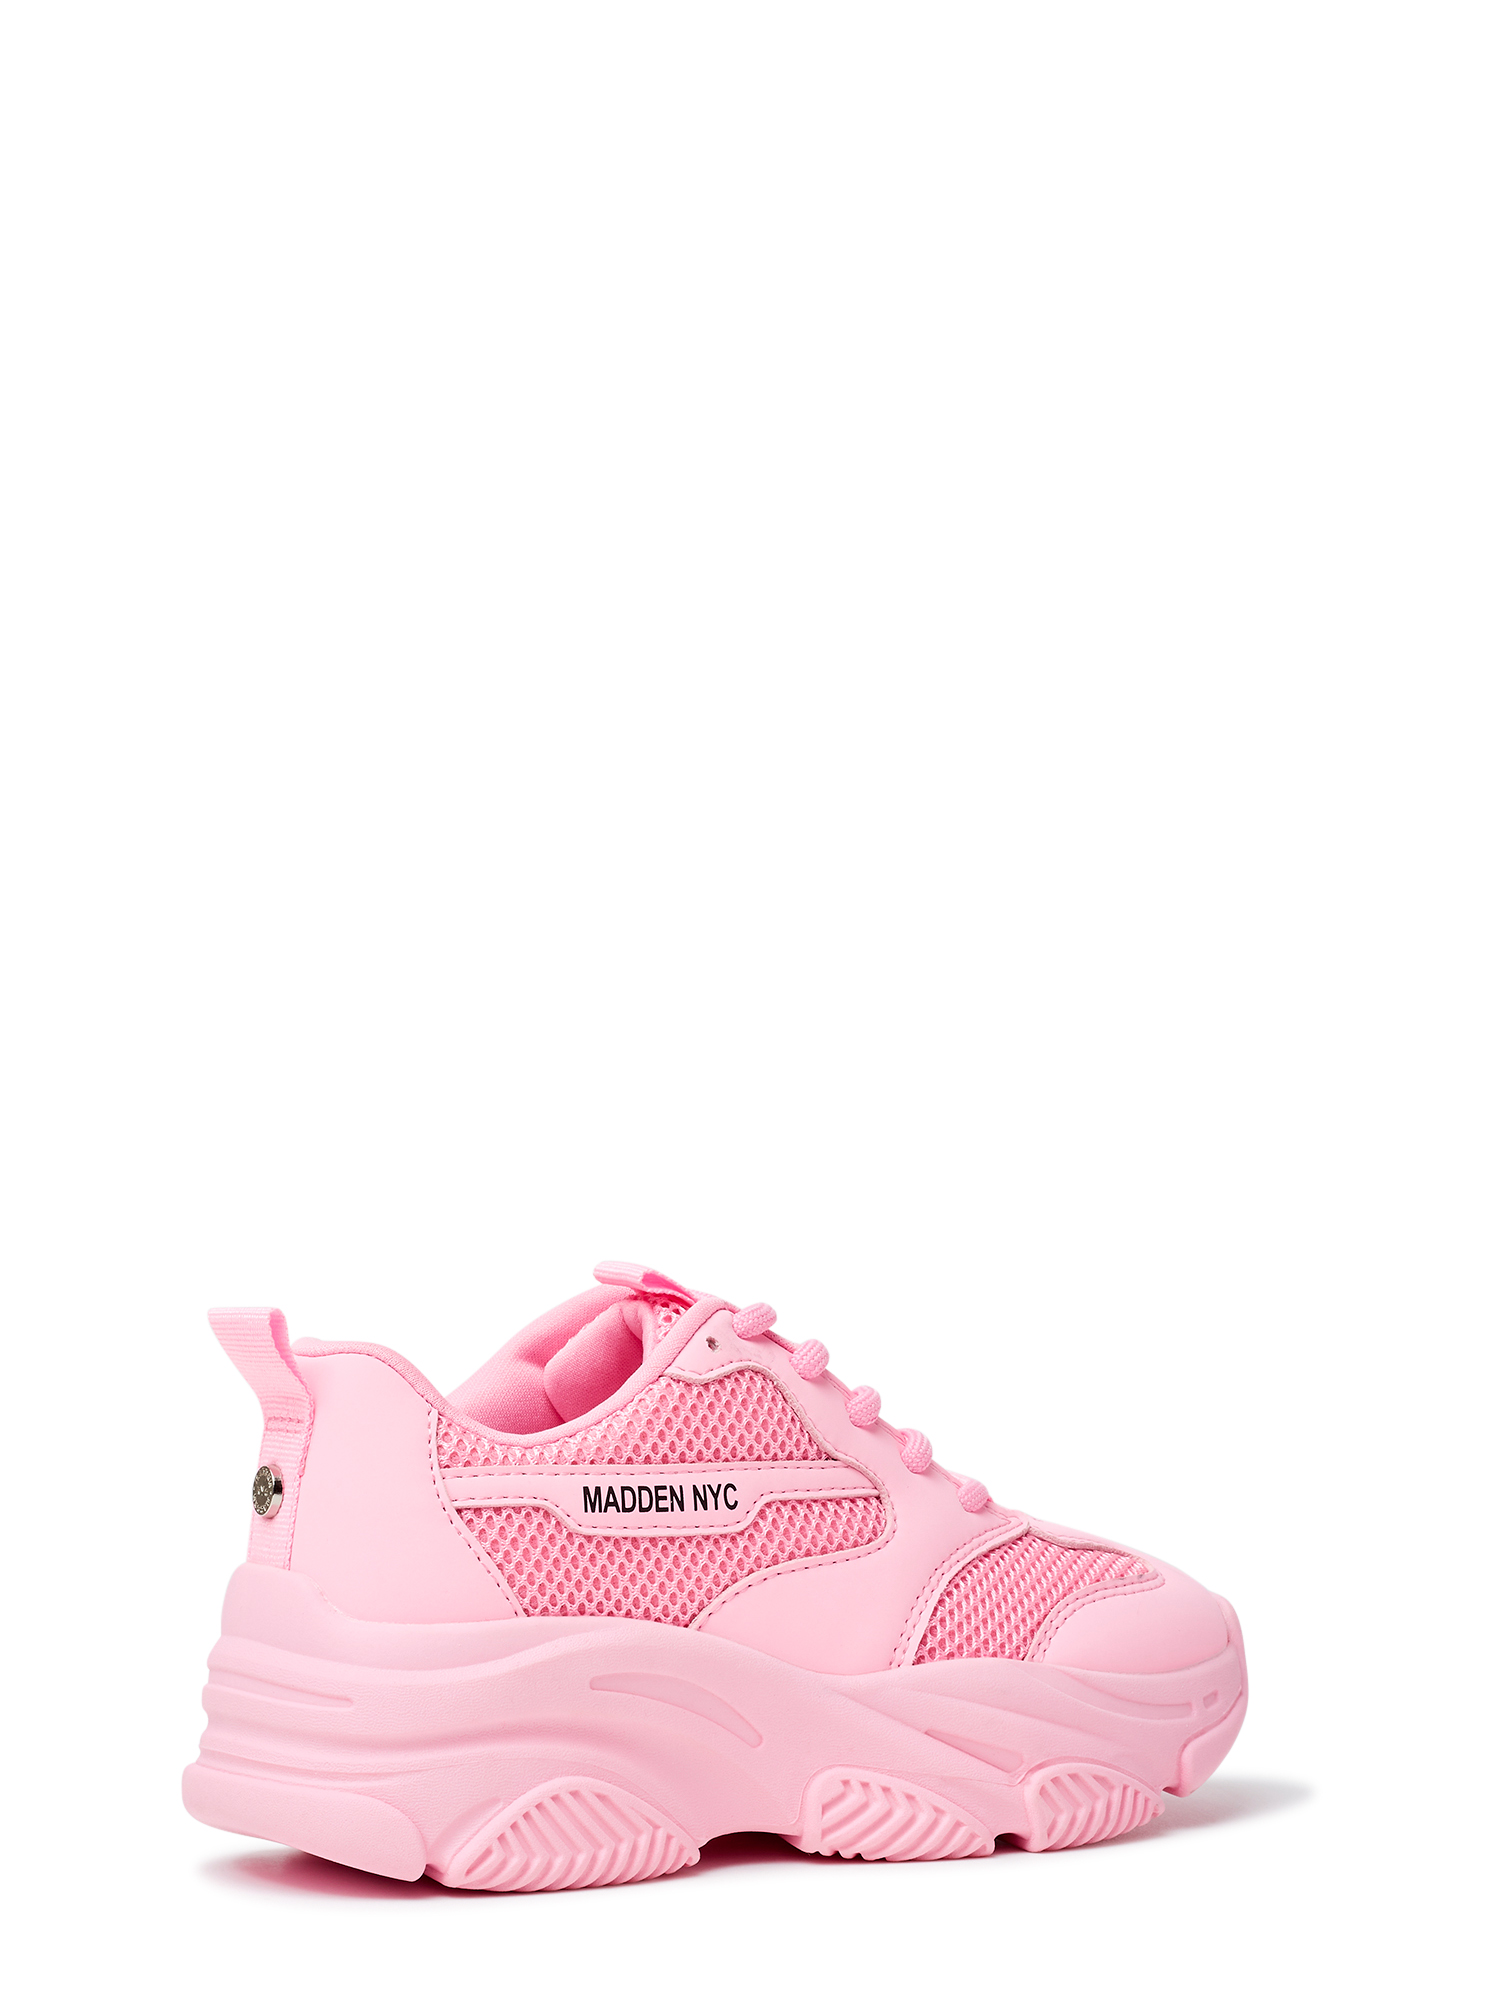 Madden NYC Little Girl & Big Girl Dad Sneaker, Sizes 13-5